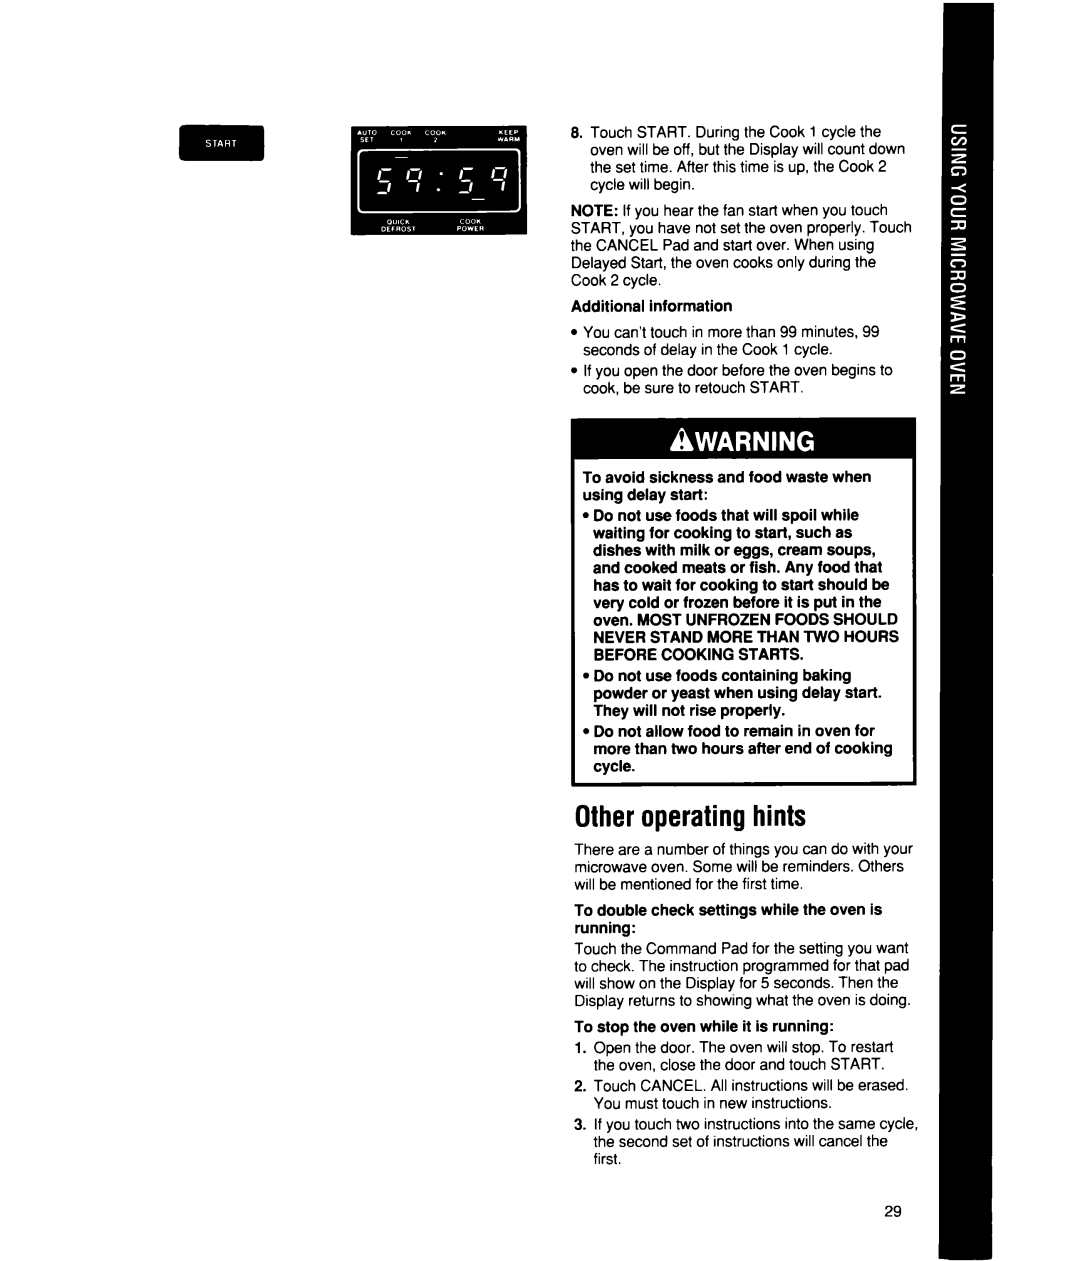 Whirlpool MS2101XW, MS2100XW manual Other operating hints, Additional information, To stop the oven while it is running 